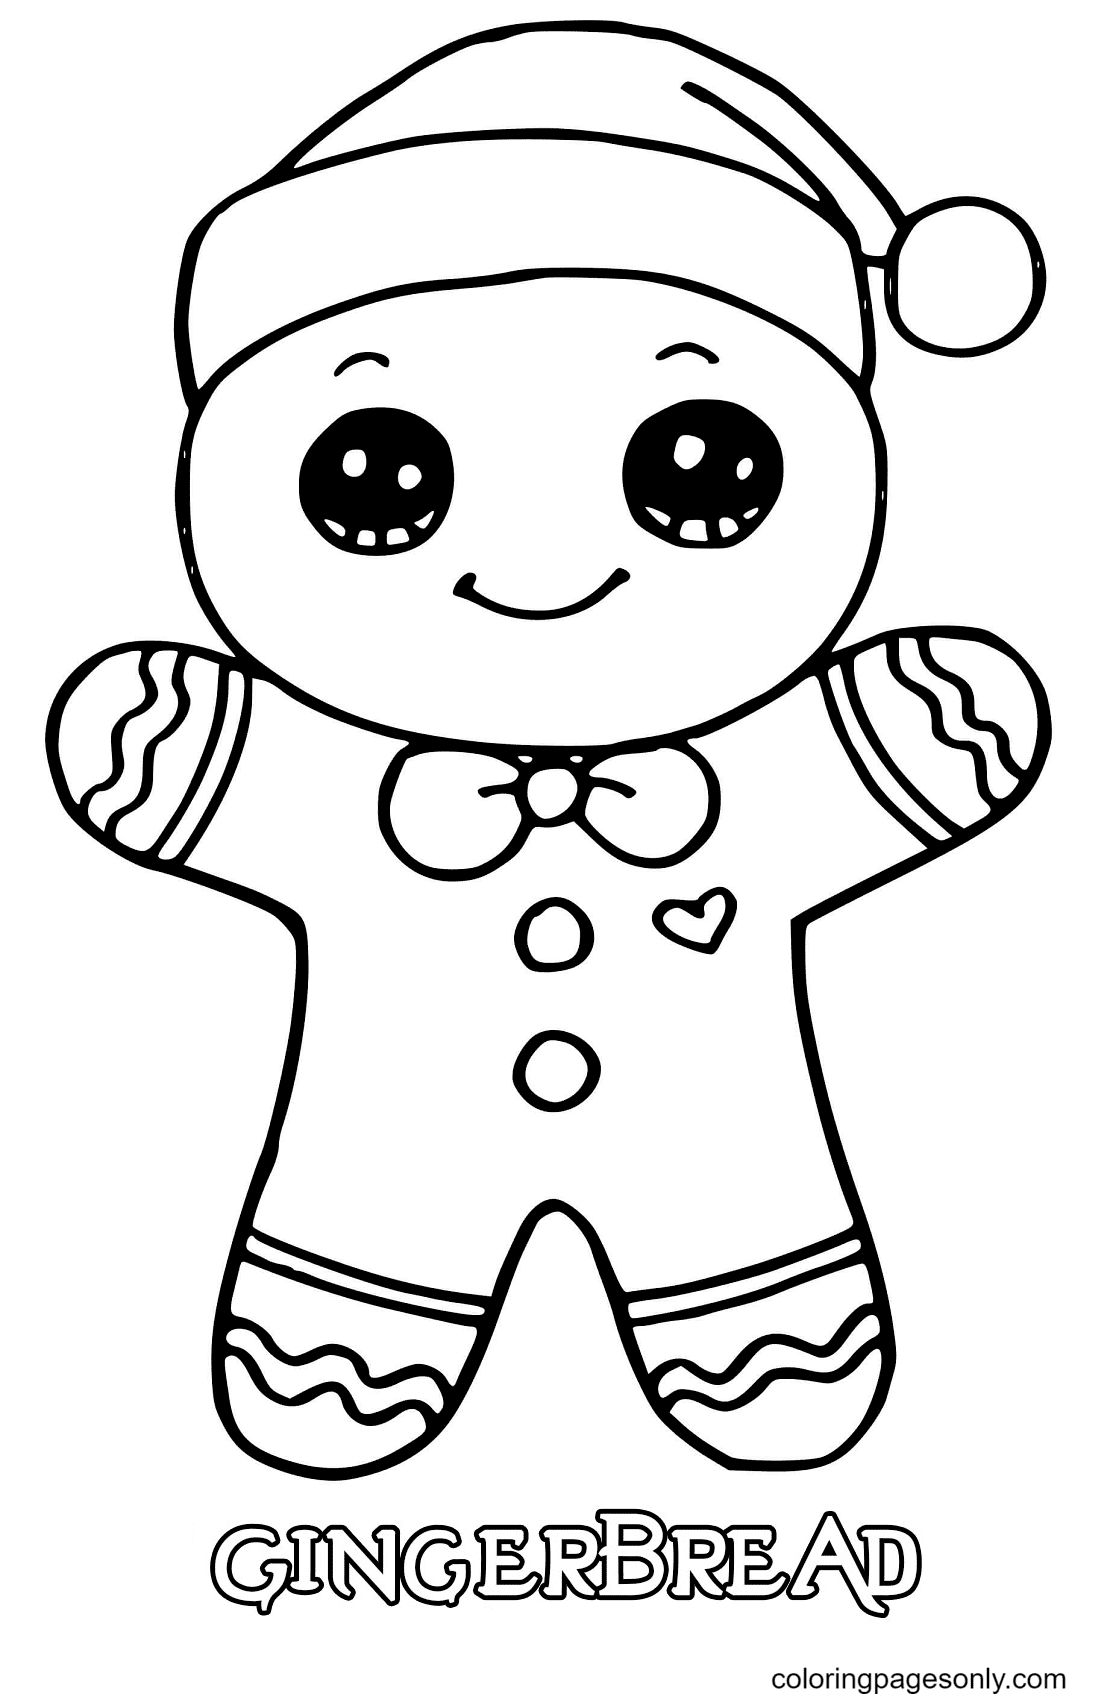 Gingerbread Man Coloring Pages - Coloring Pages For Kids And Adults